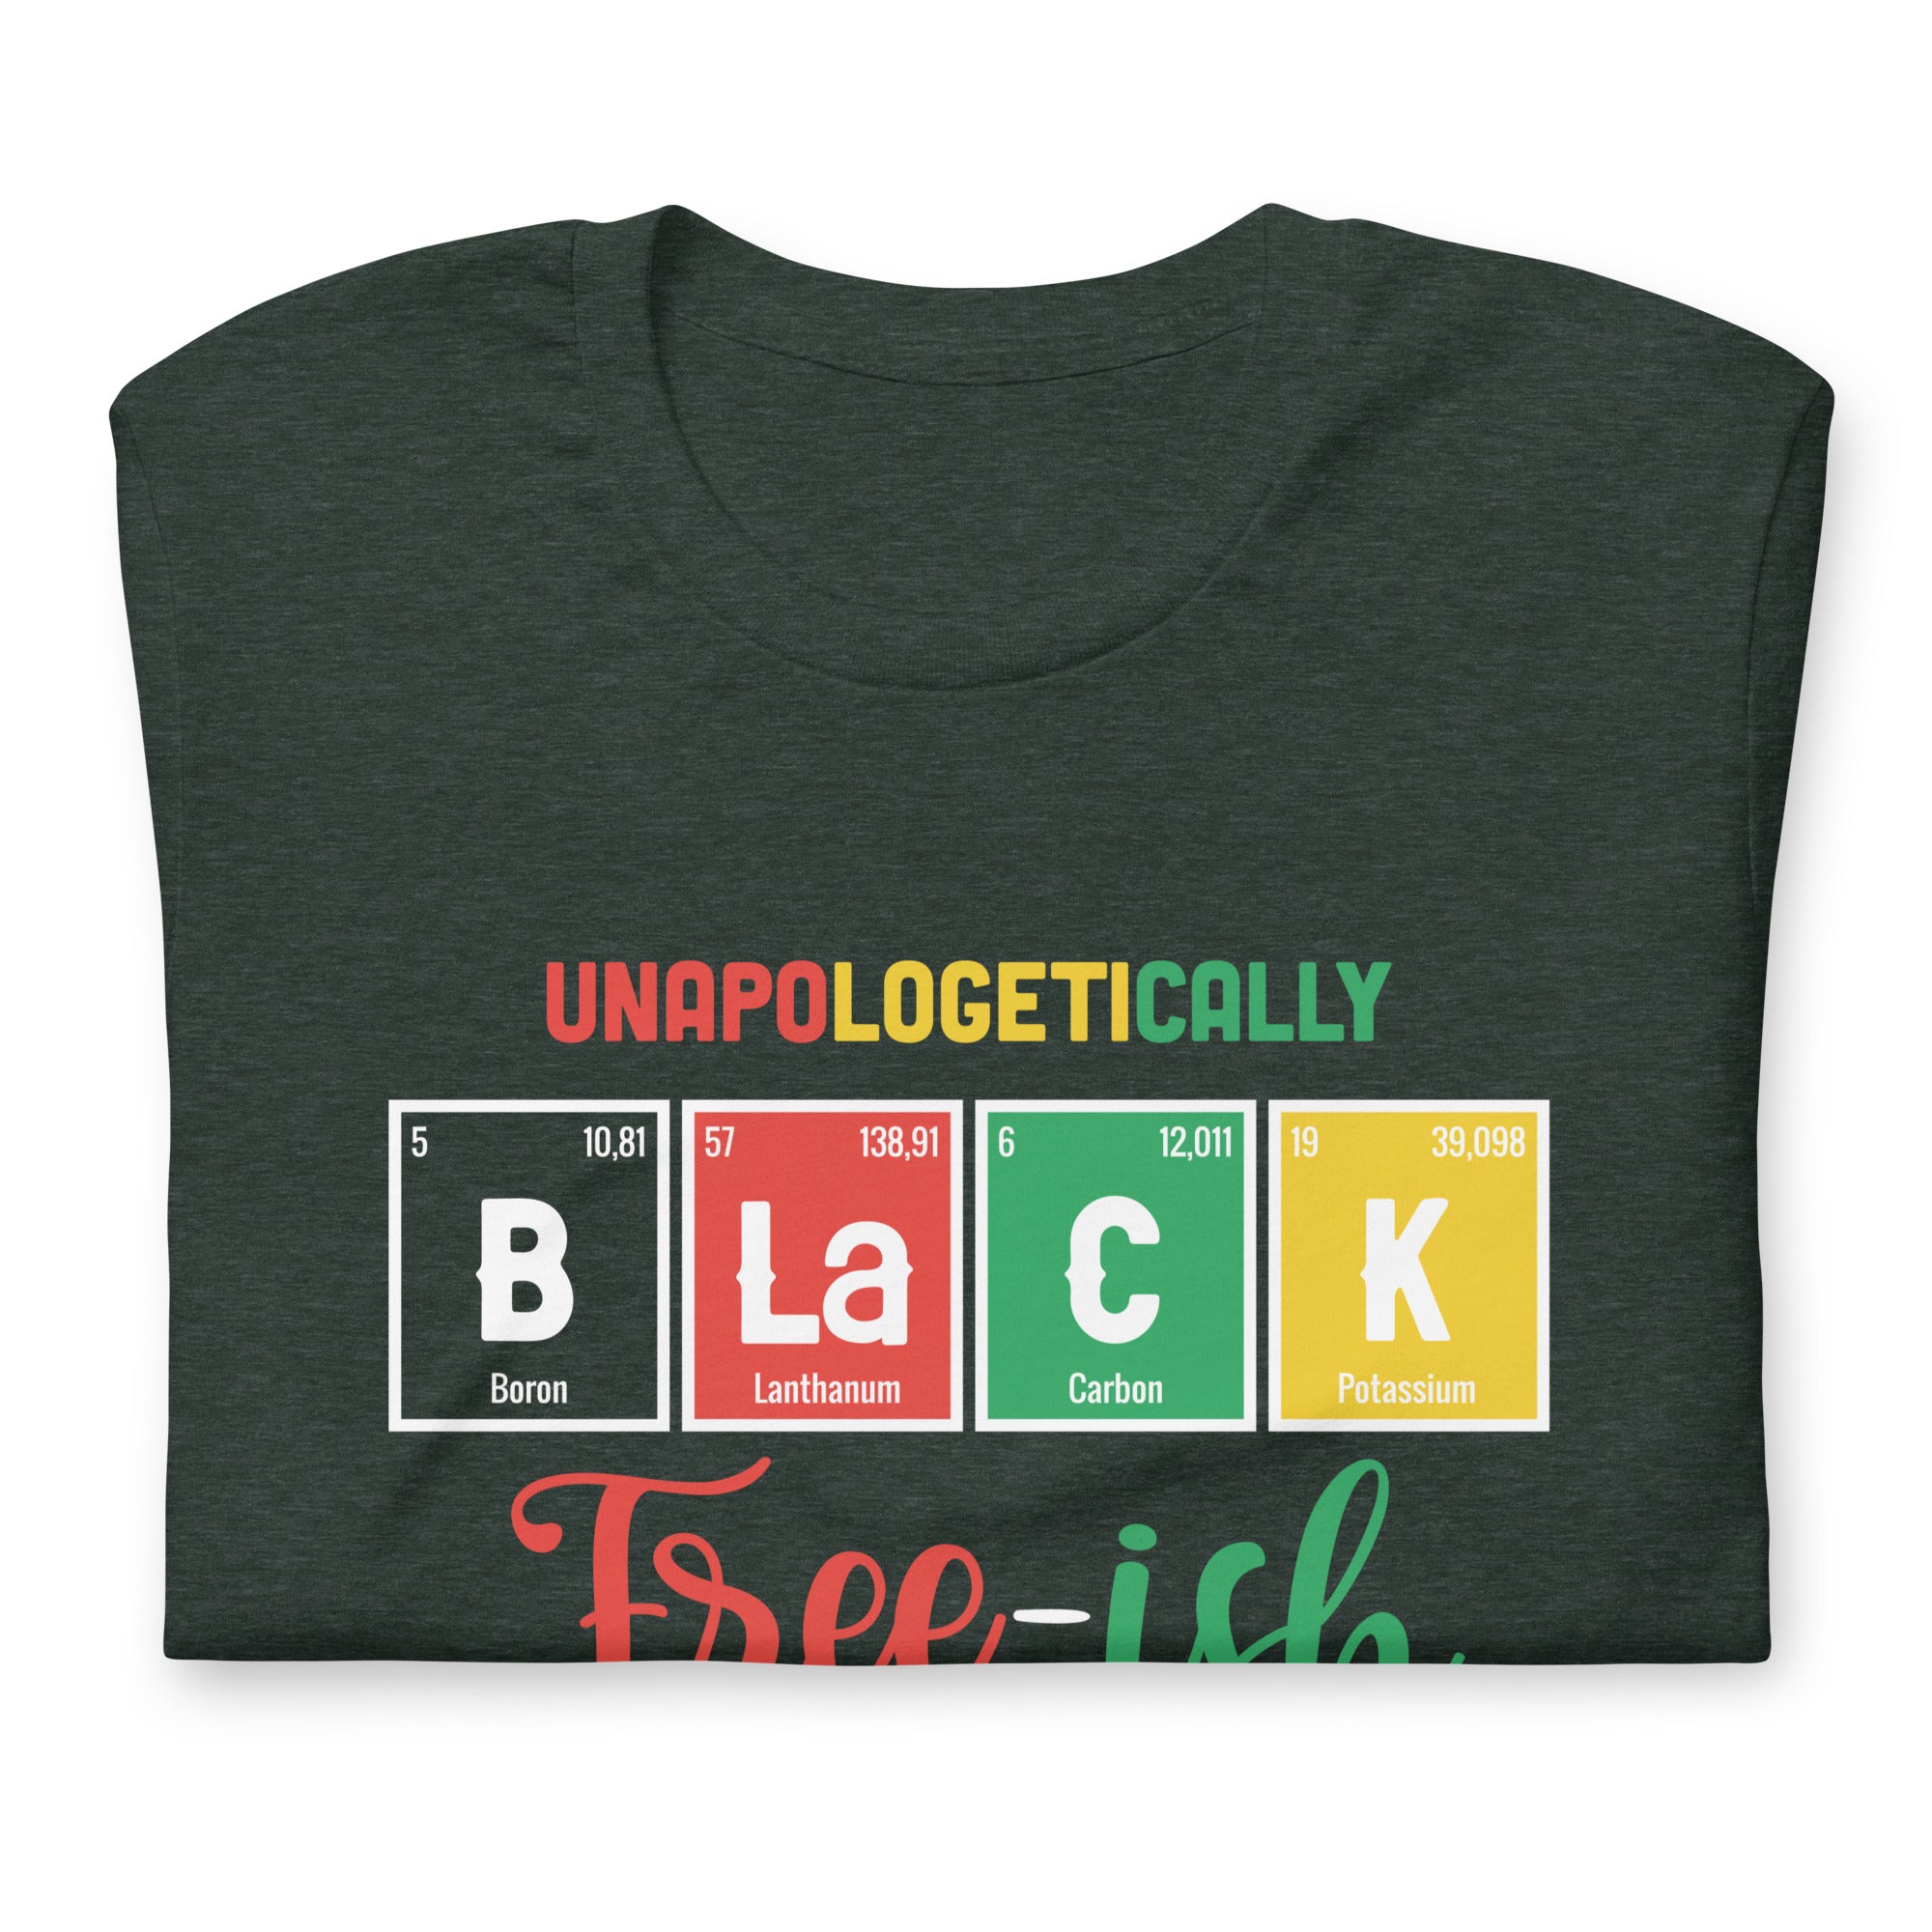 "Unapologetically" Unisex t-shirt